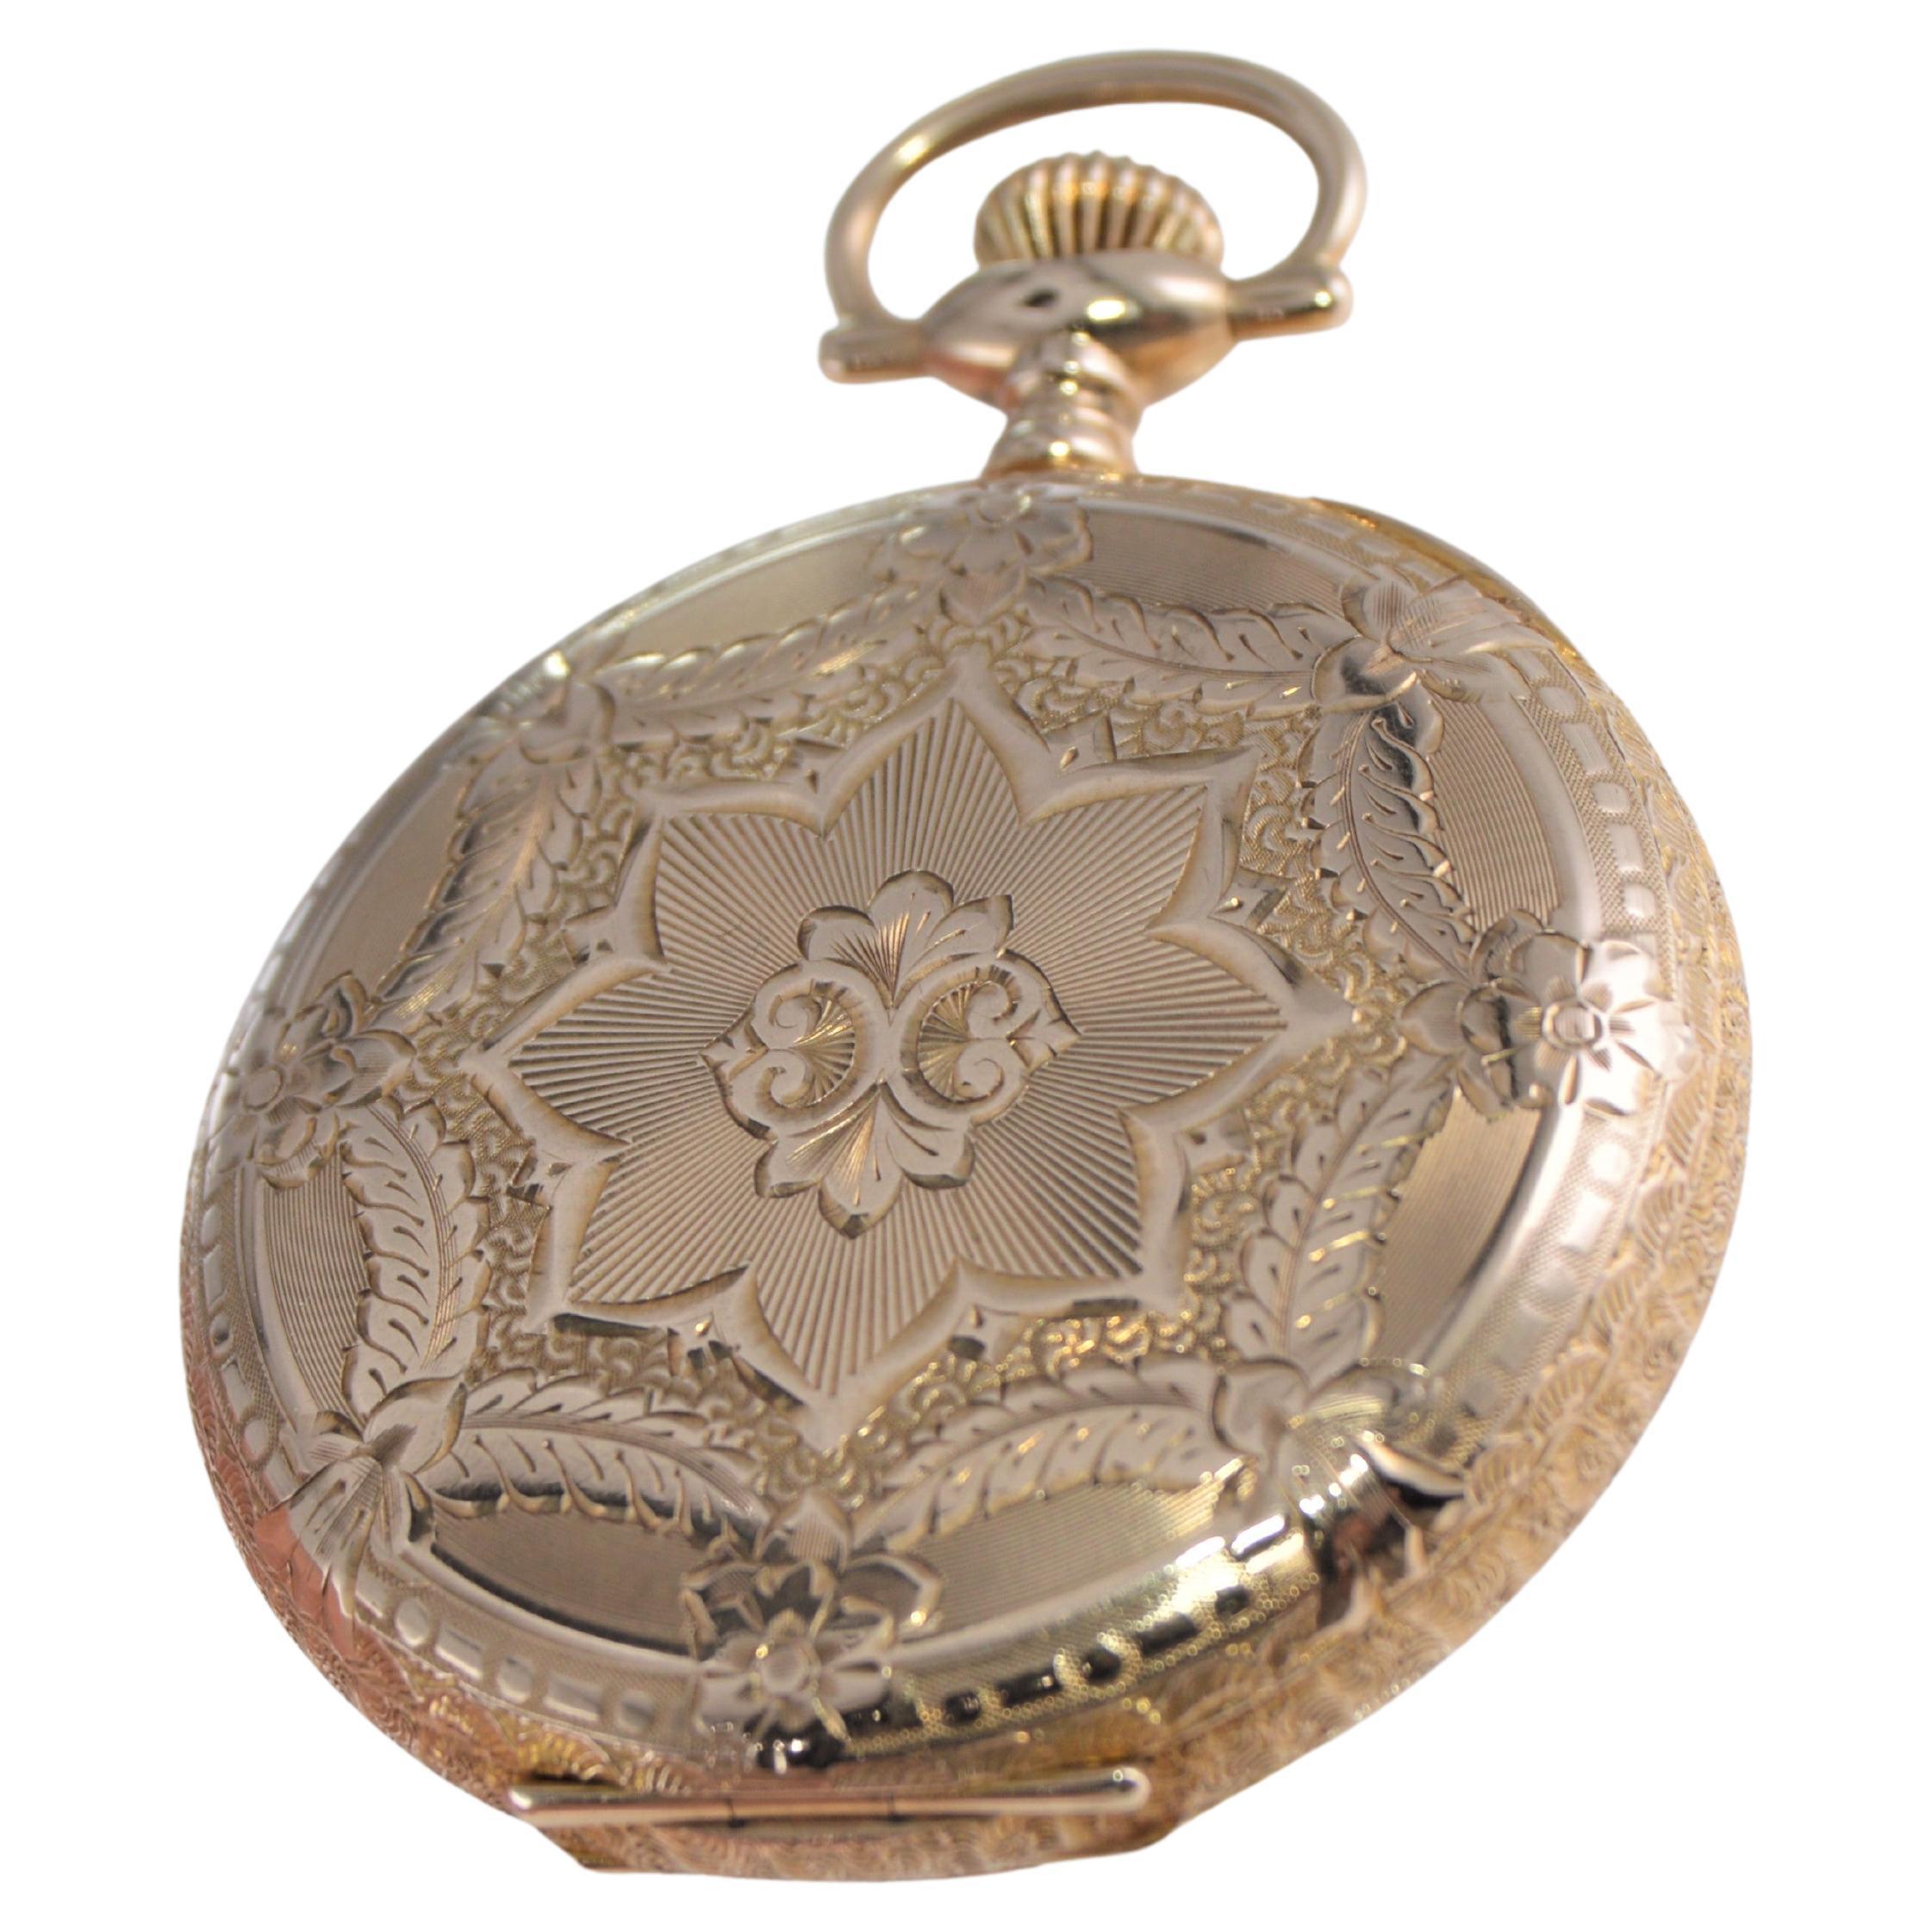 Waltham 14k Yellow Gold Hunters Cased Pocket Watch Circa 1900 Hand Engraved For Sale 1